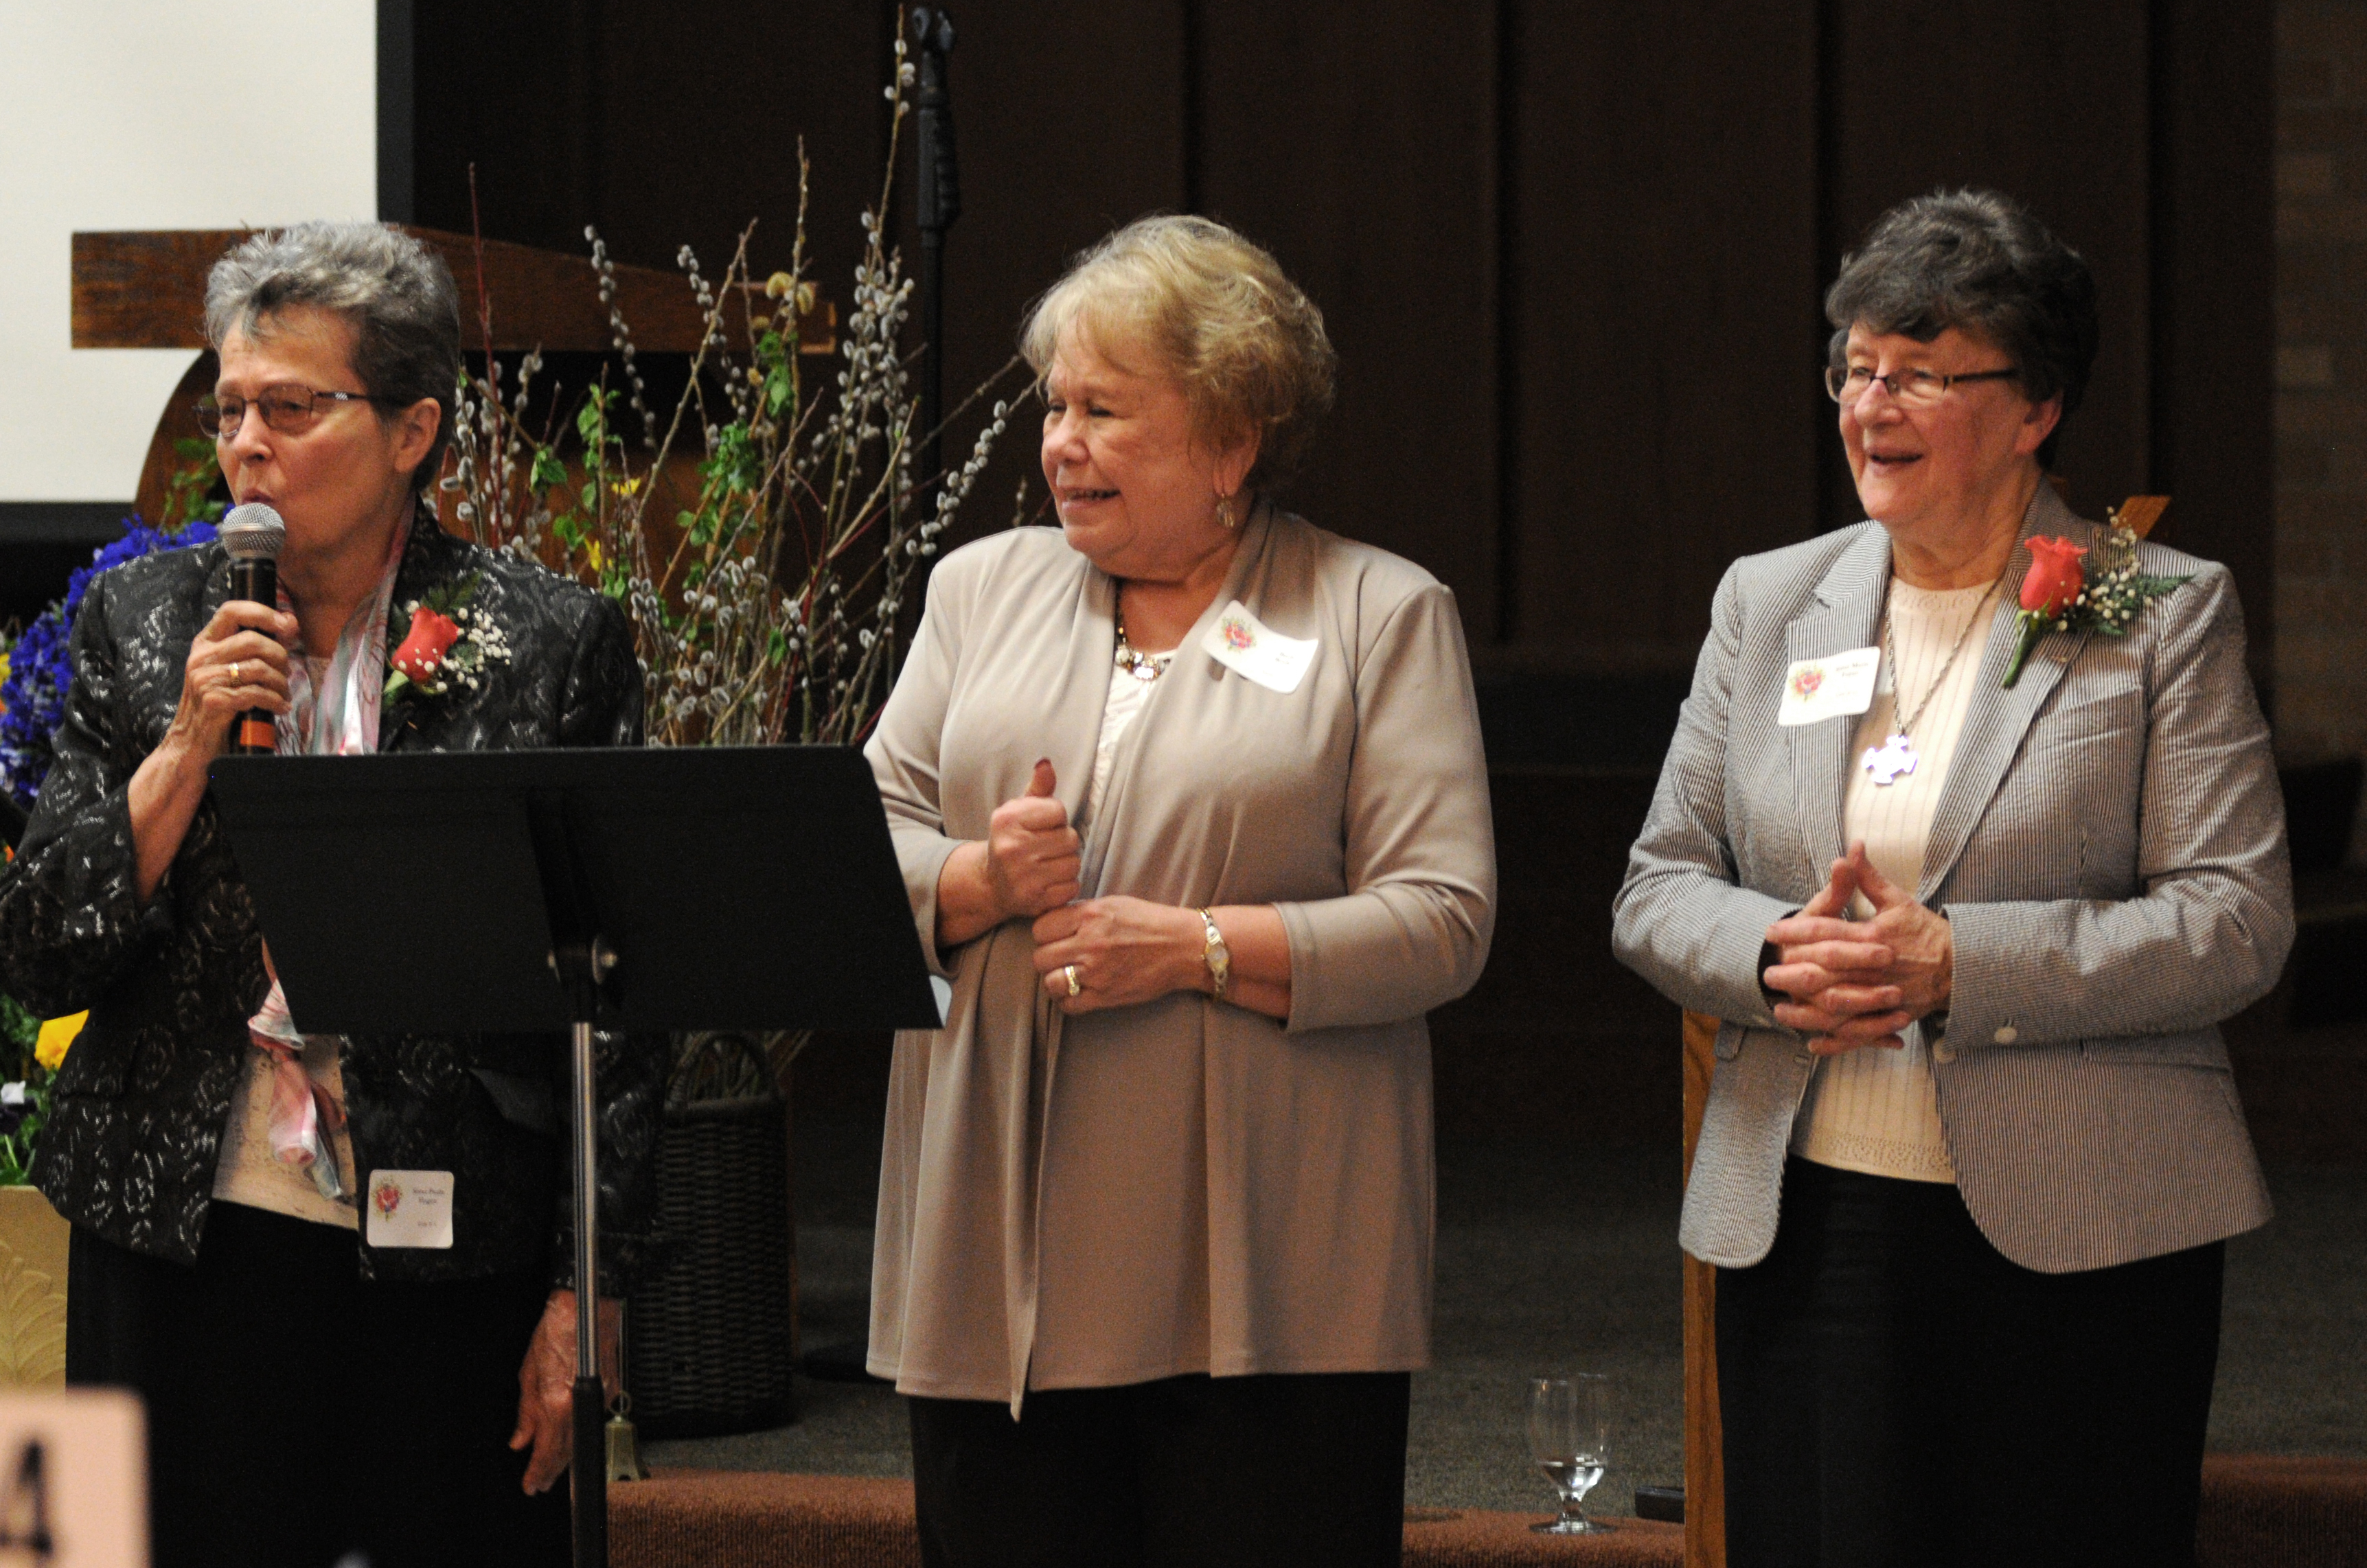 Sisters Paula Hagen and Marie Fujan honor Ms. Barbara Rode (center), President and CEO of Saint Therese Foundation, at the 2018 Prioress Dinner.